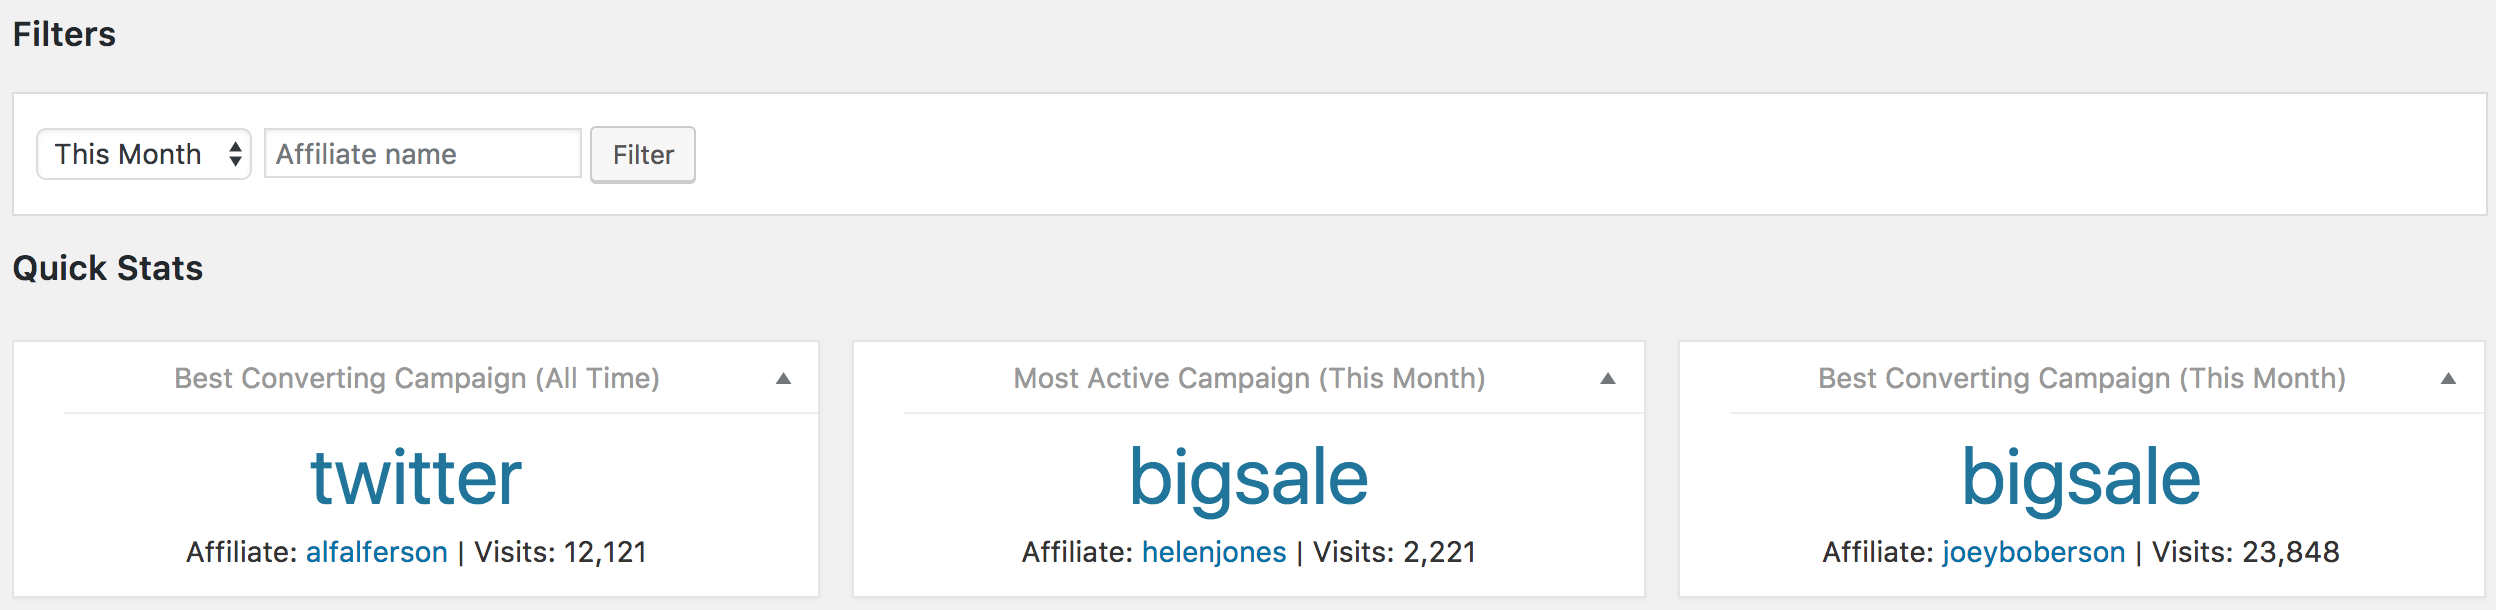 Viewing campaign data in the reports section of AffiliateWP.